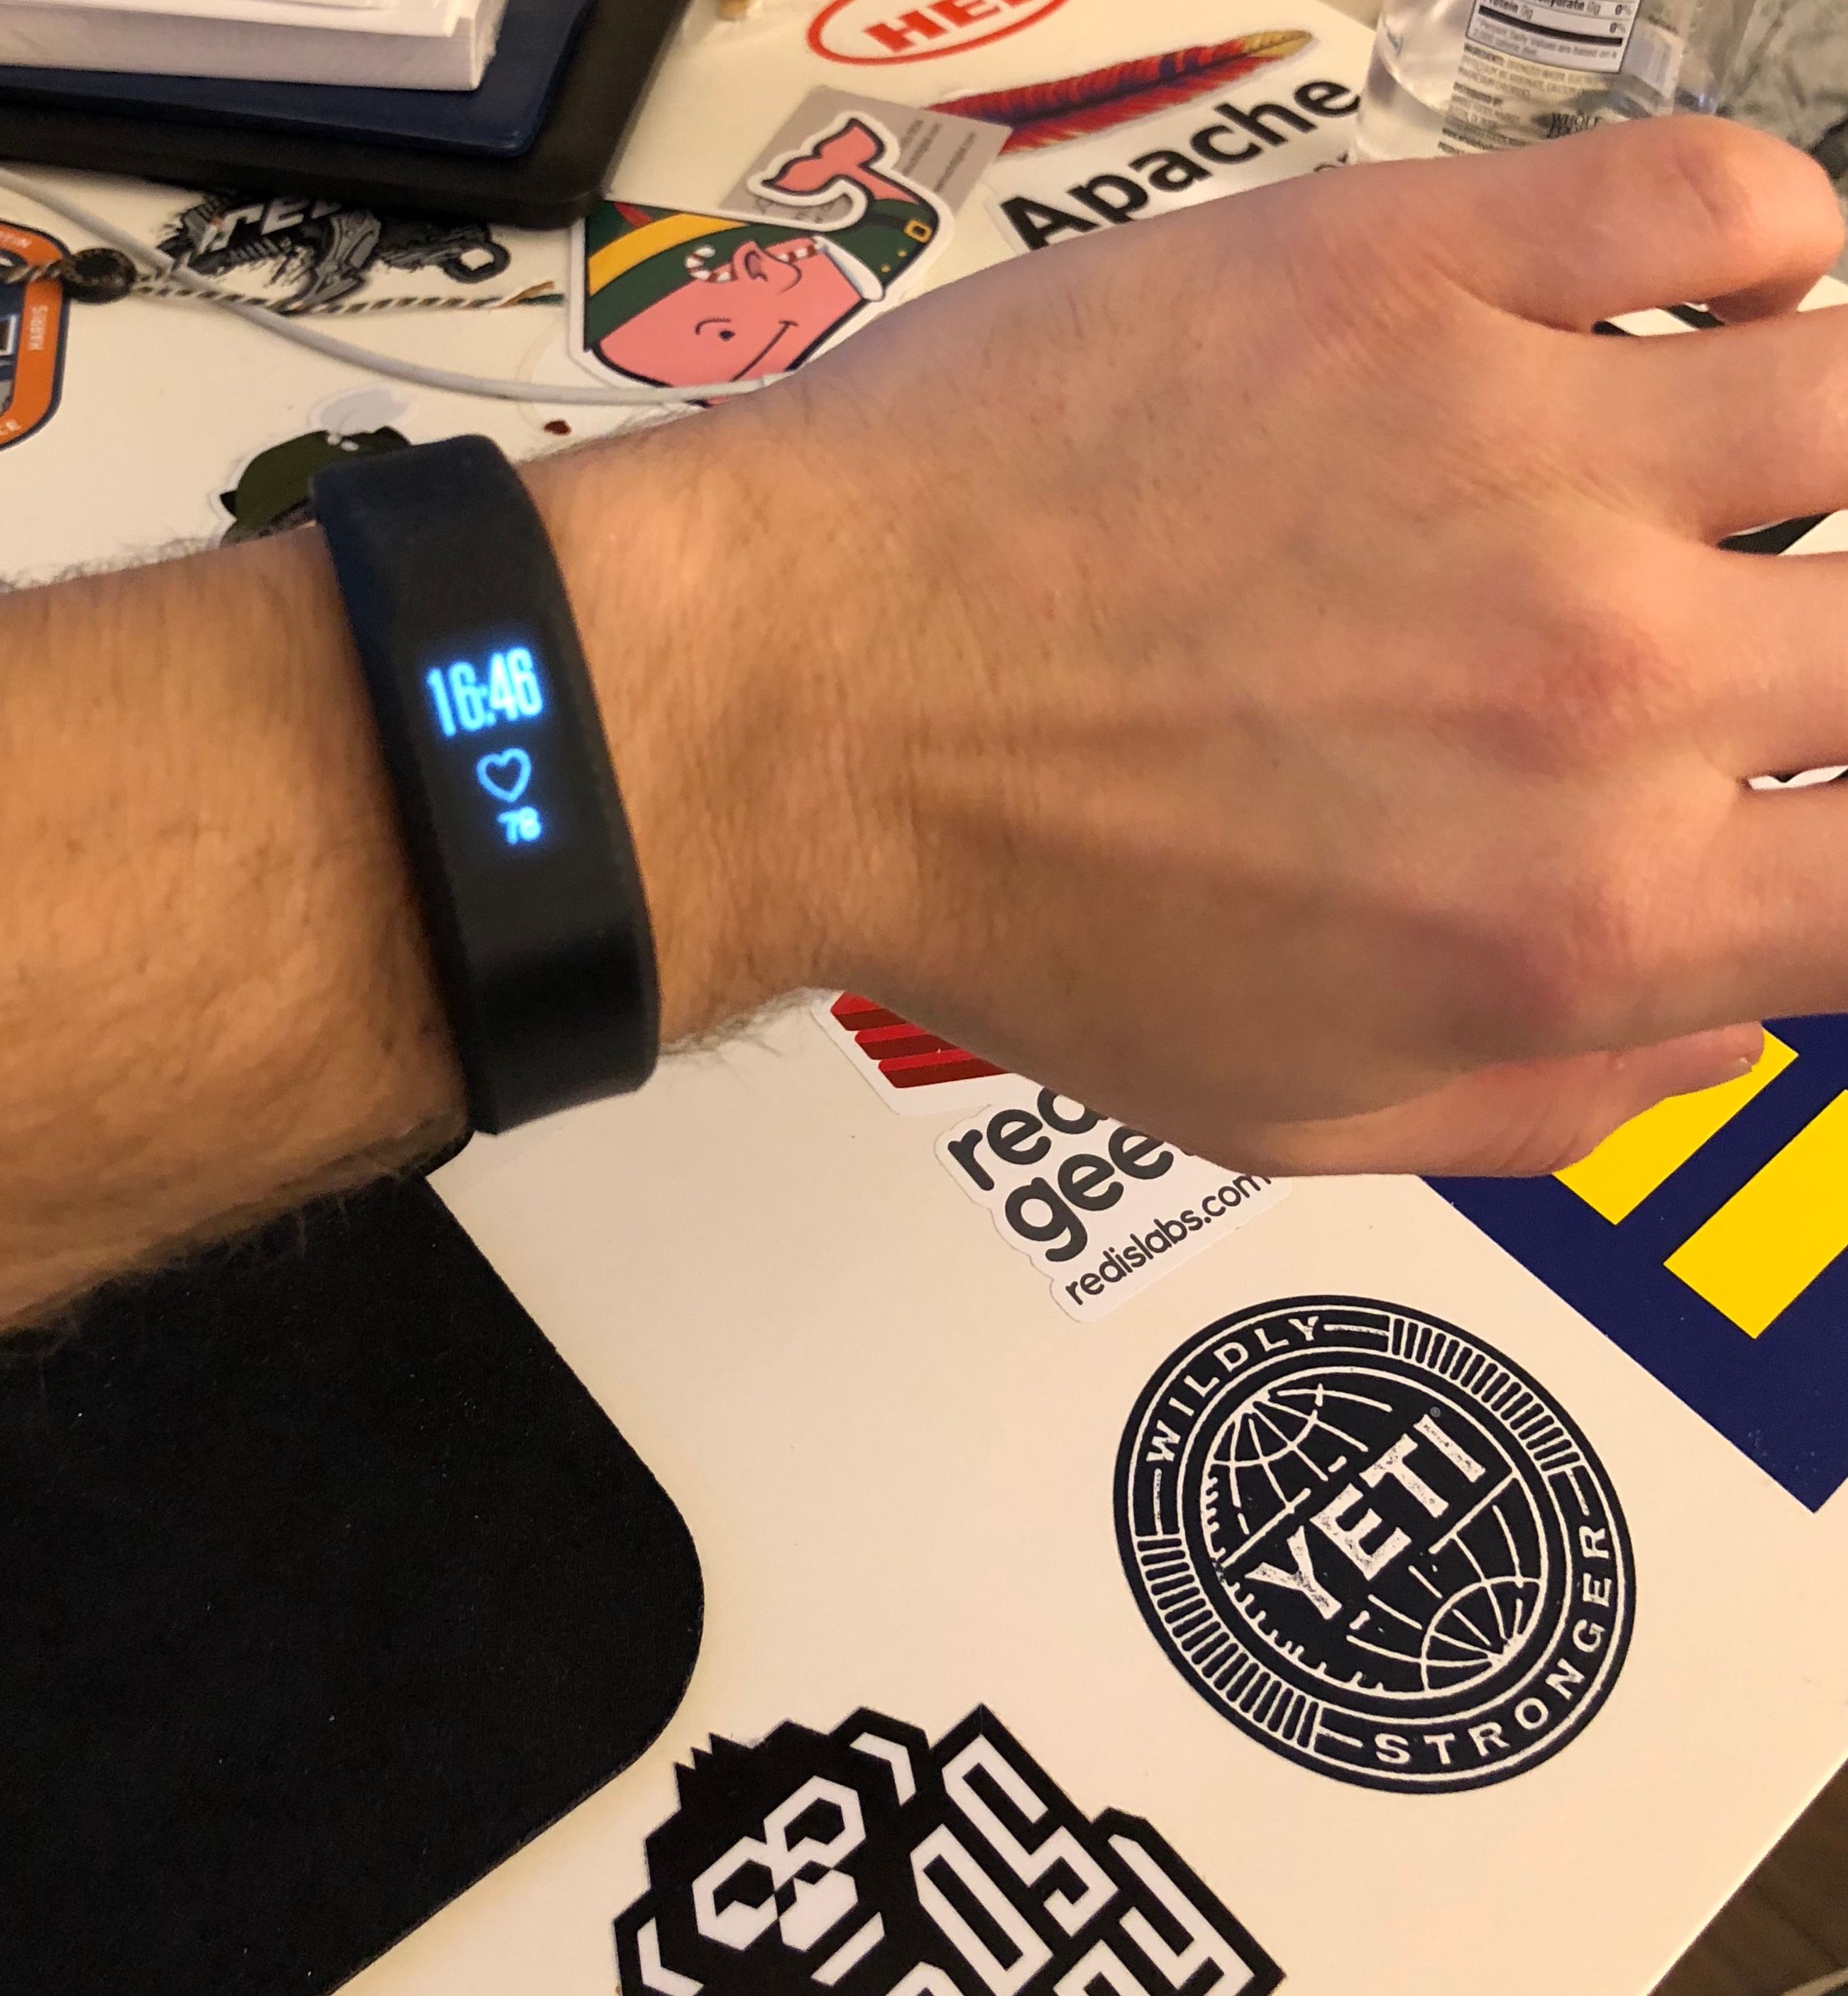 fitbit ihealth